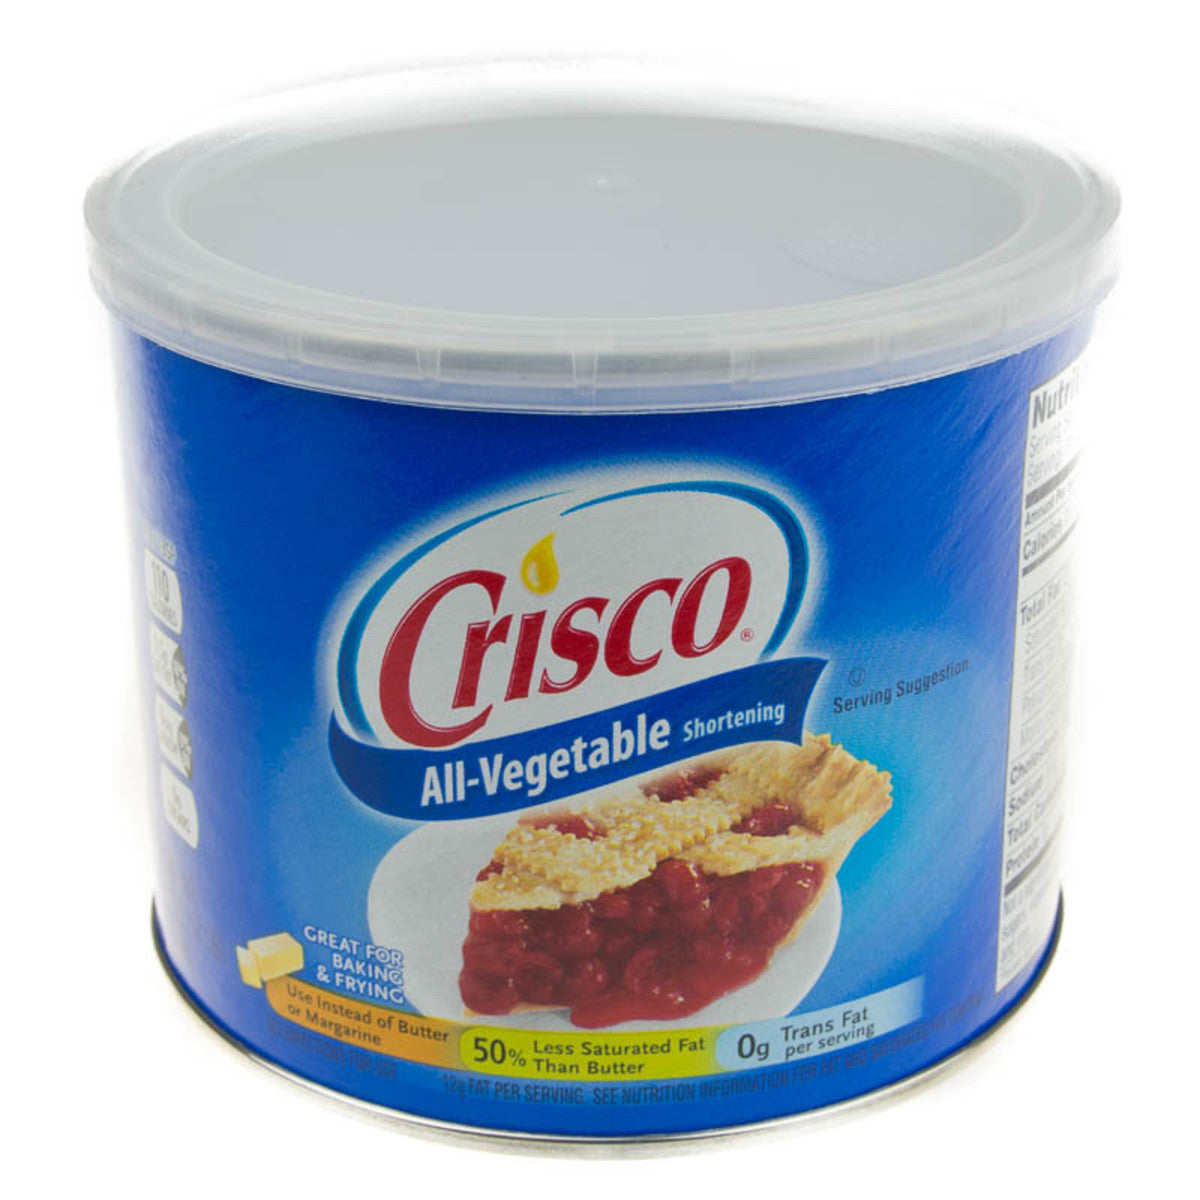 Crisco 440g - Just for you desires